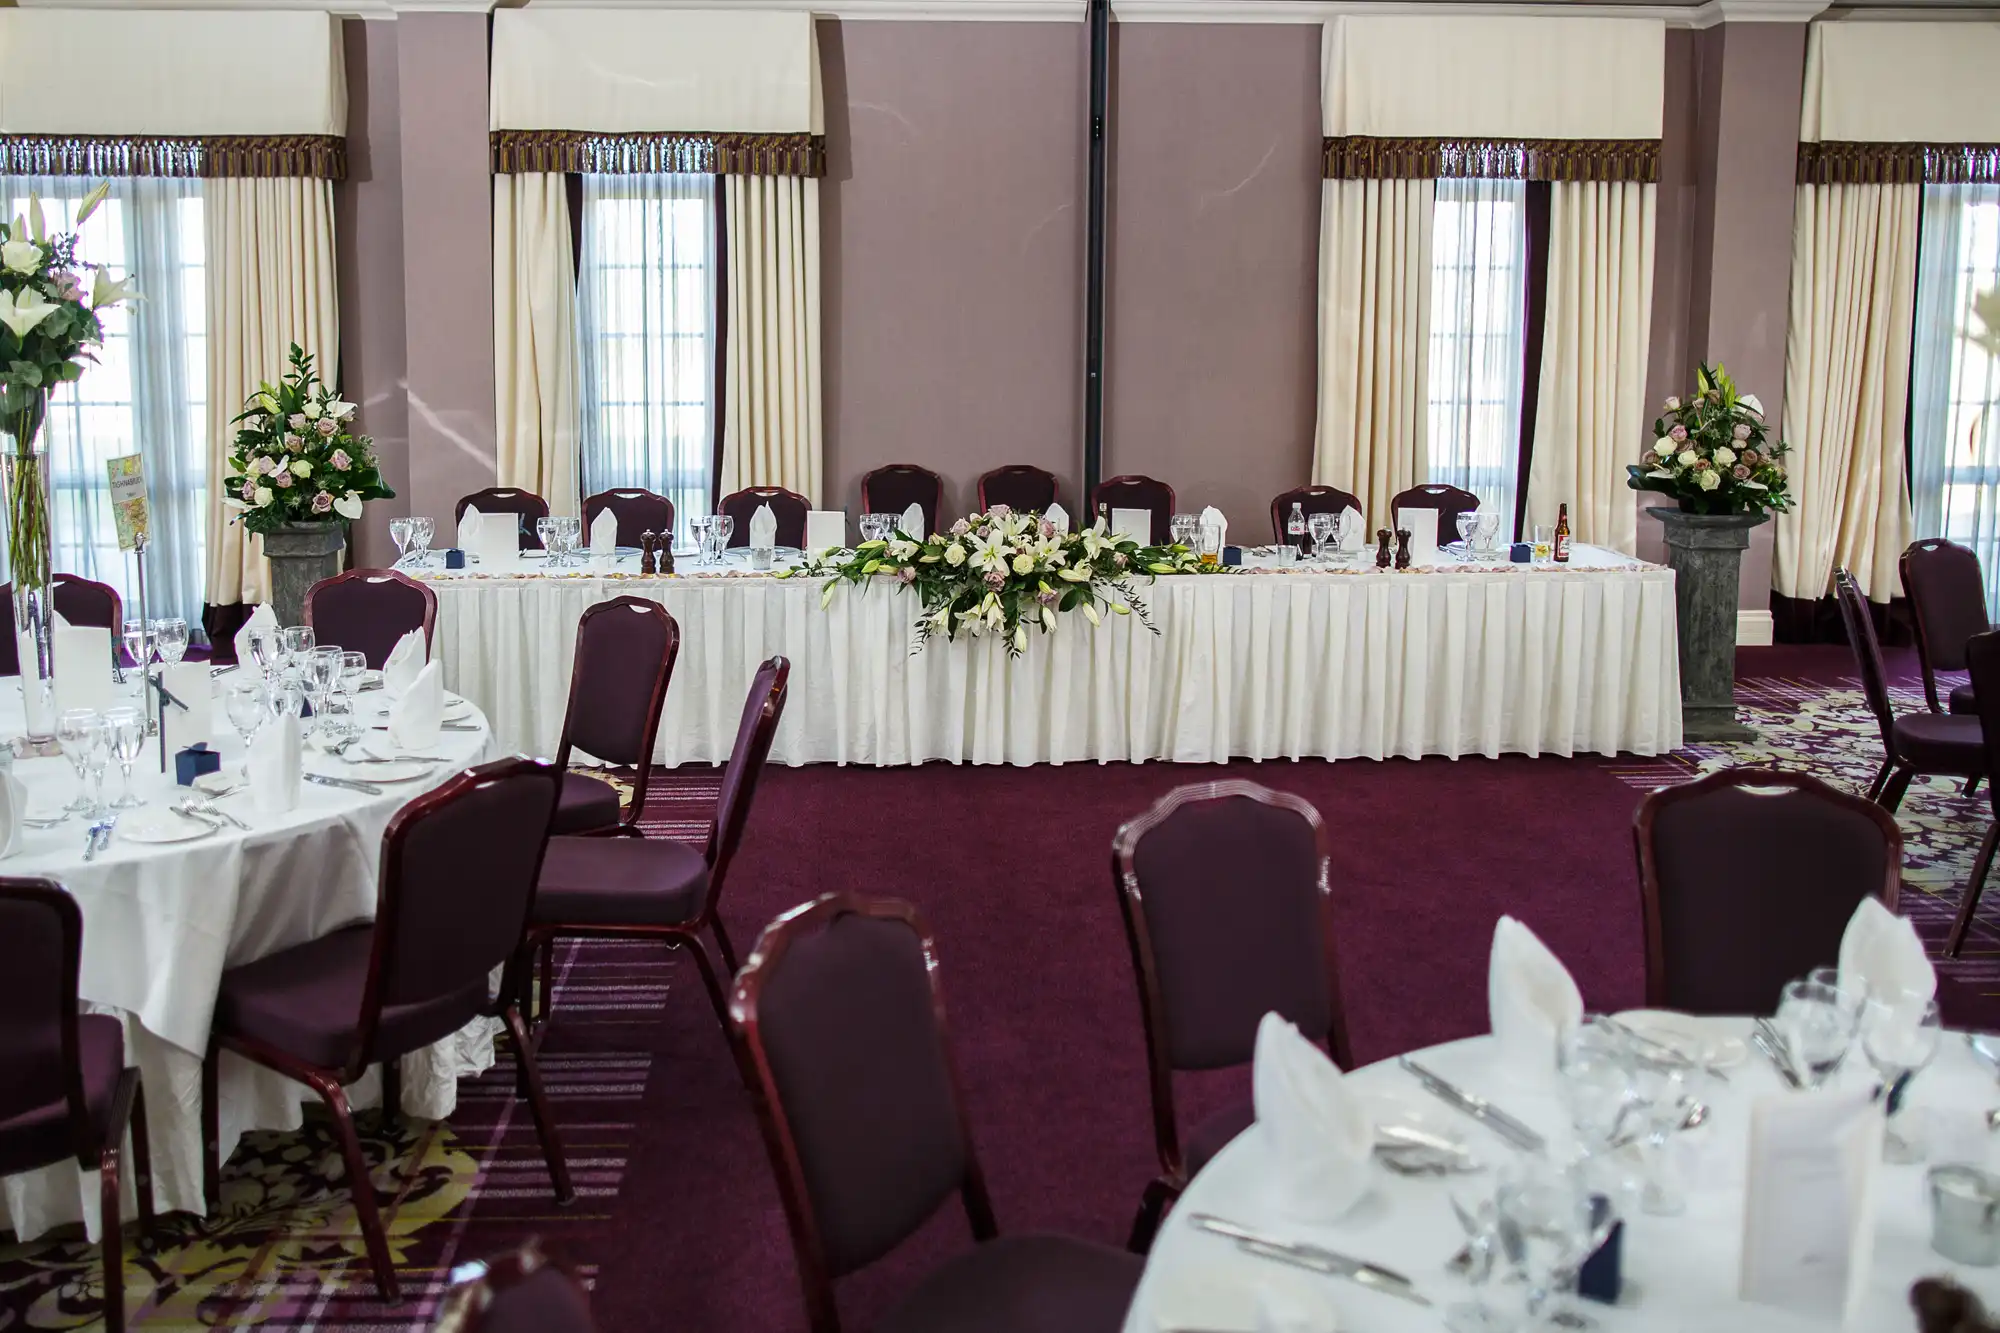 Elegant wedding reception room setup with decorated tables, floral centerpieces, and chairs arranged around a head table.